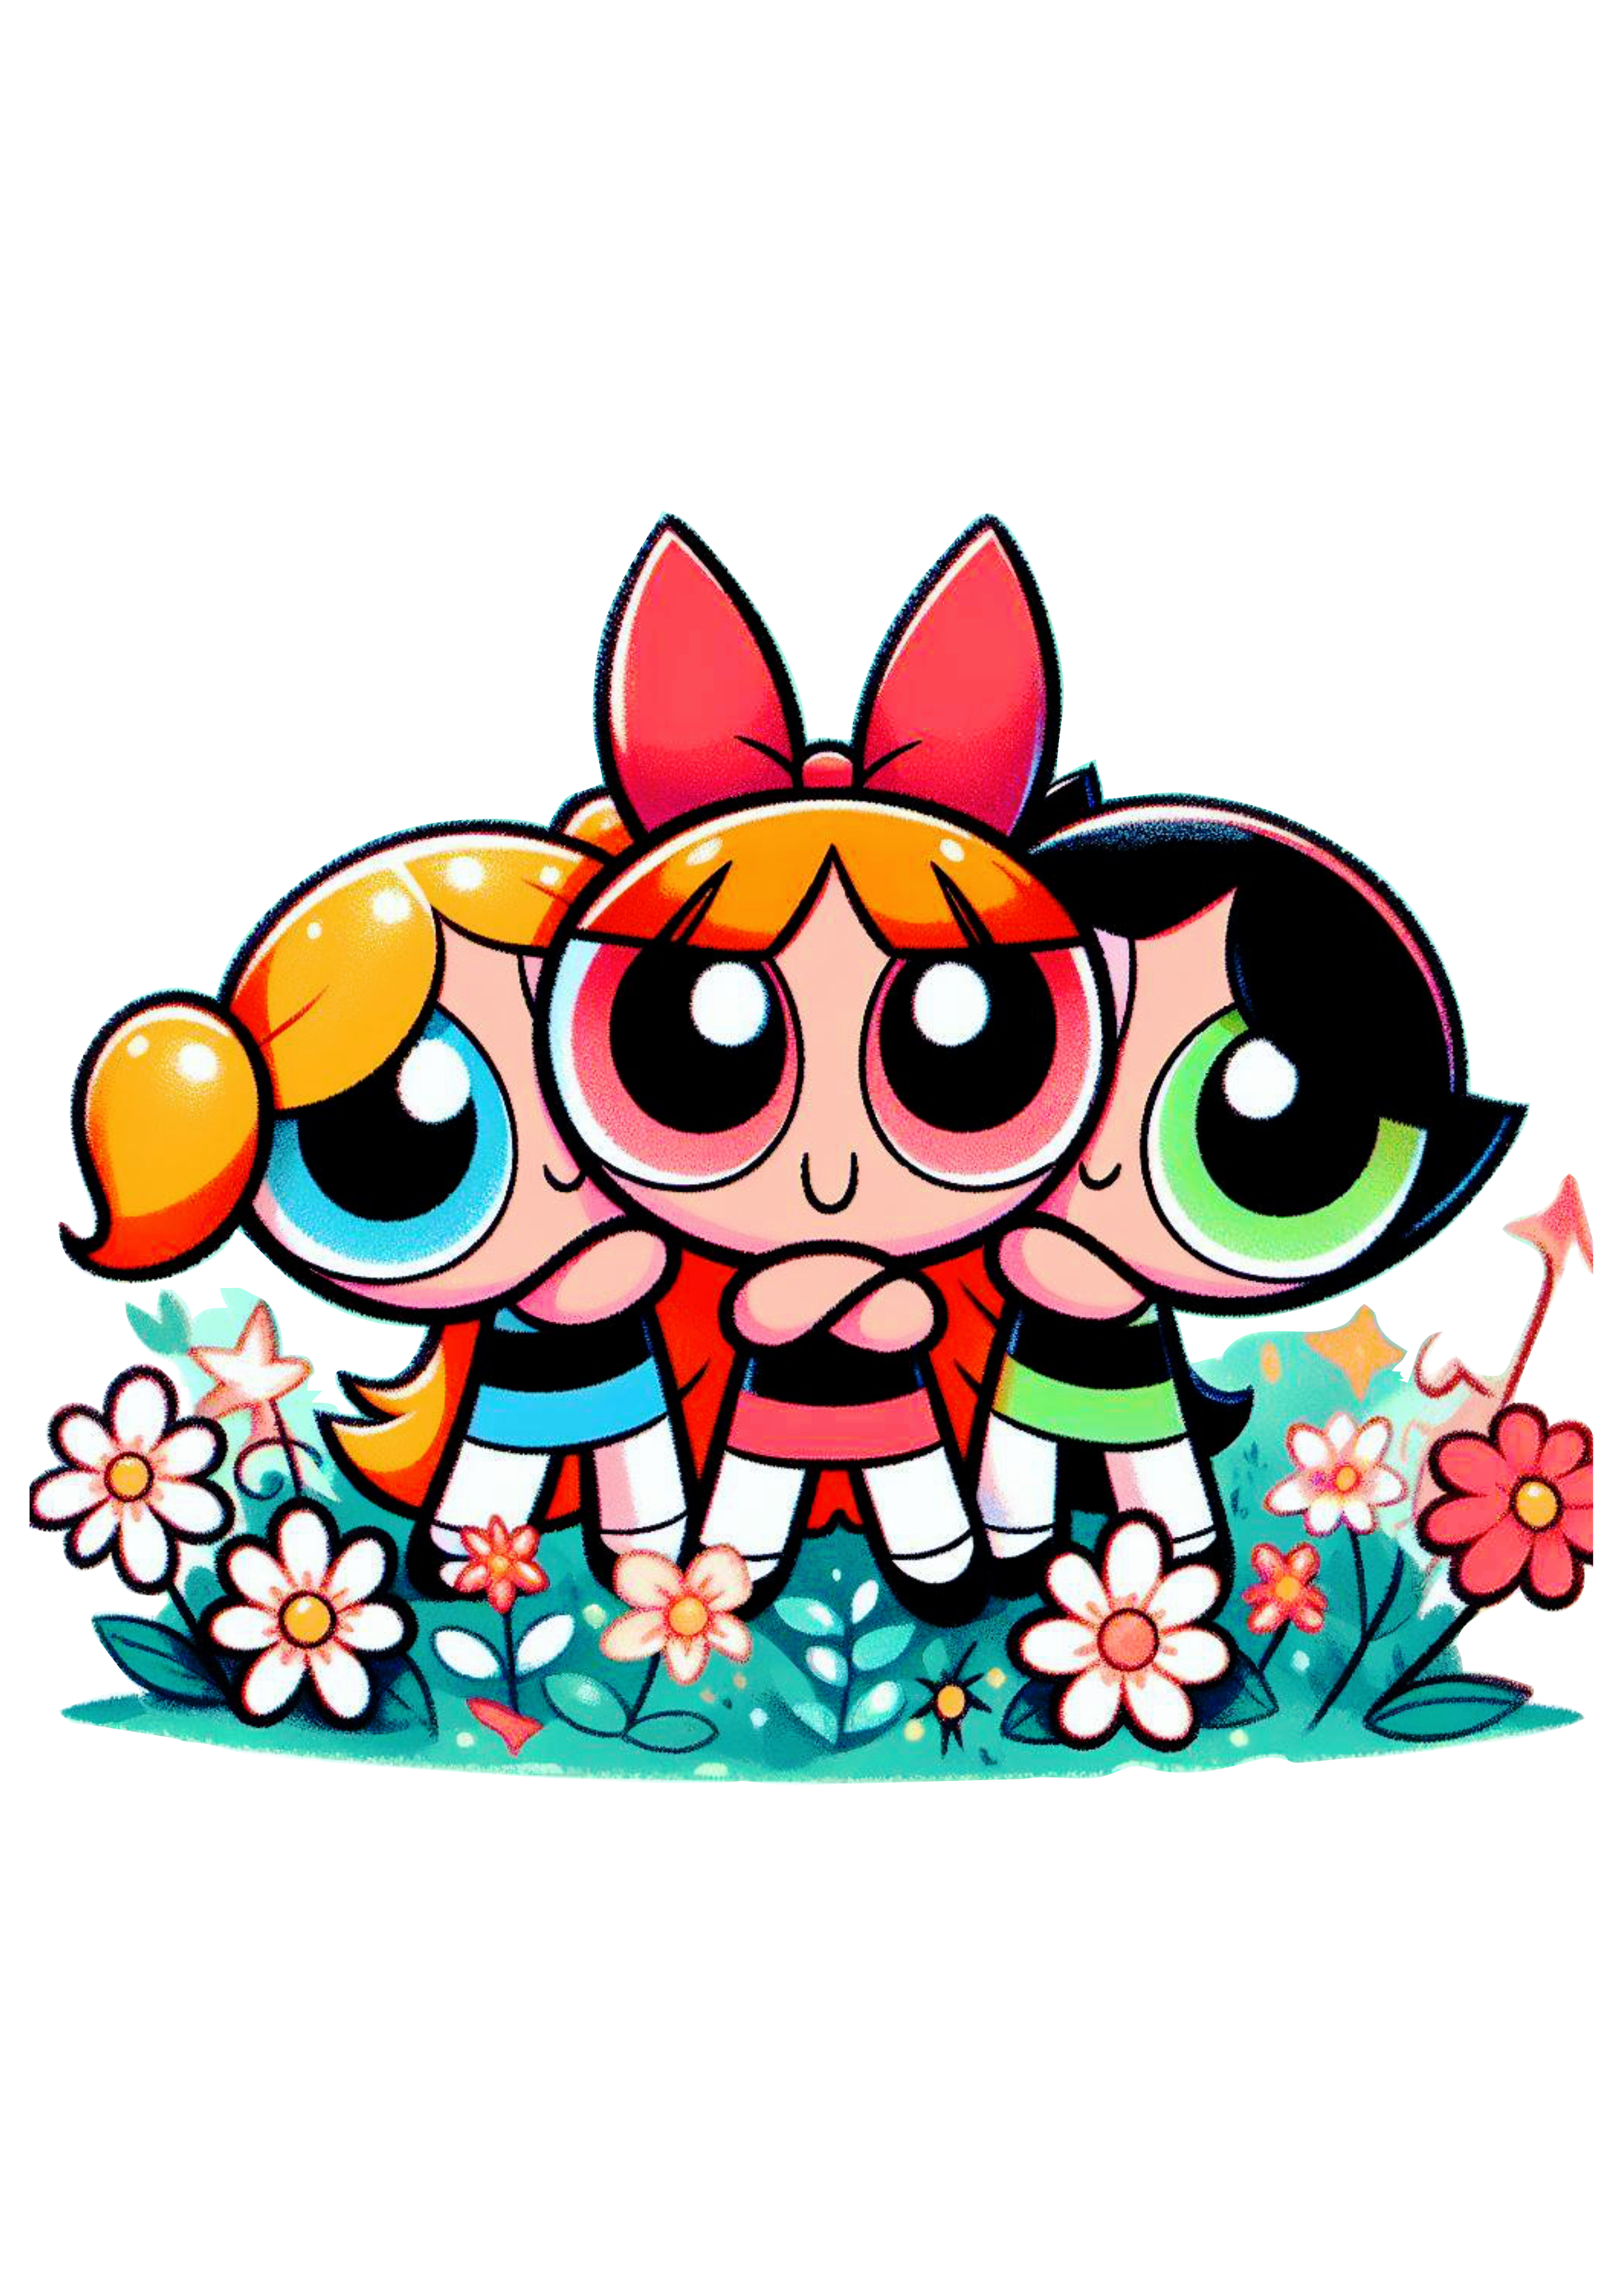 the powerpuff girls png images Blossom Bubbles and Buttercup cartoon